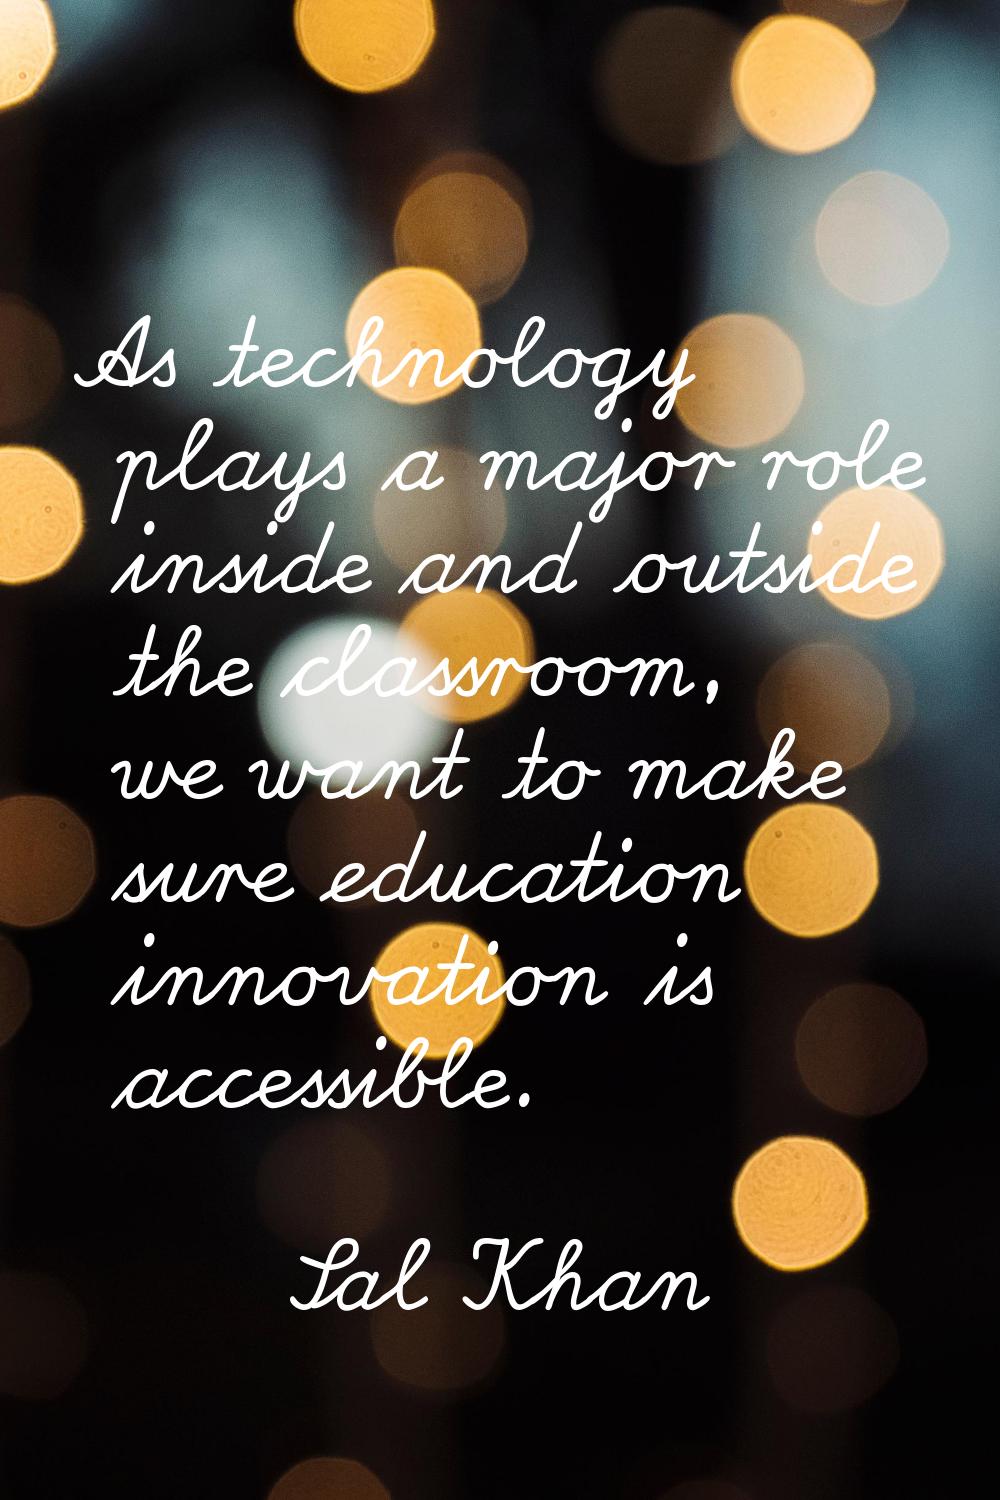 As technology plays a major role inside and outside the classroom, we want to make sure education i